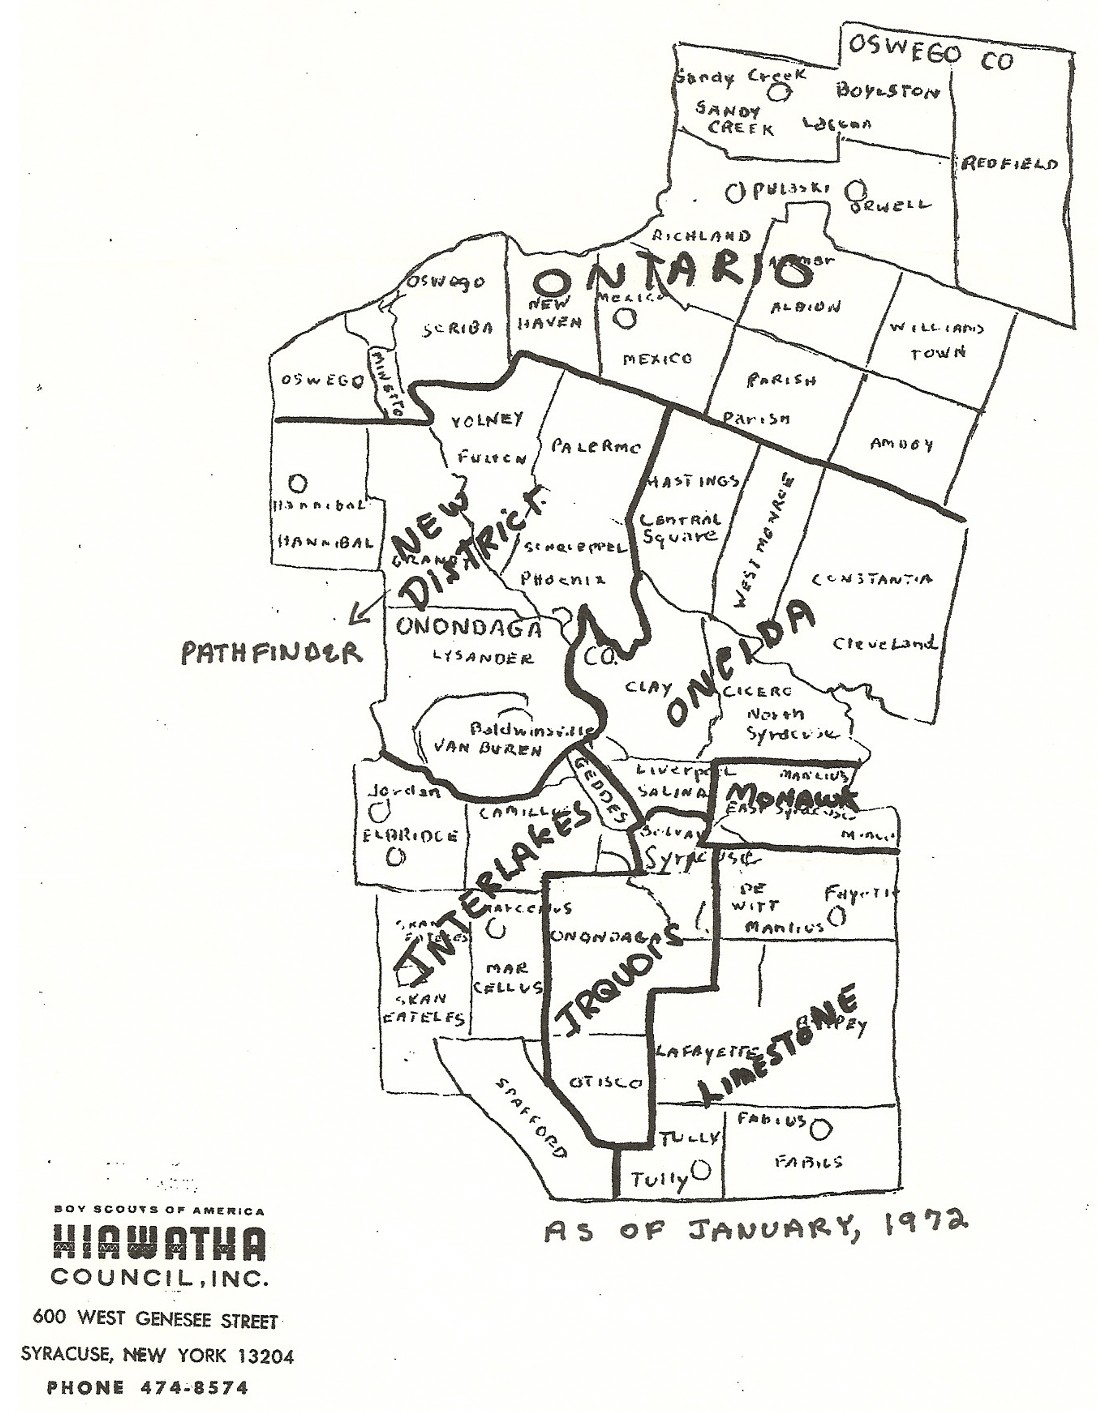 A diagram of the Hiawatha council district boundaries in October 1972